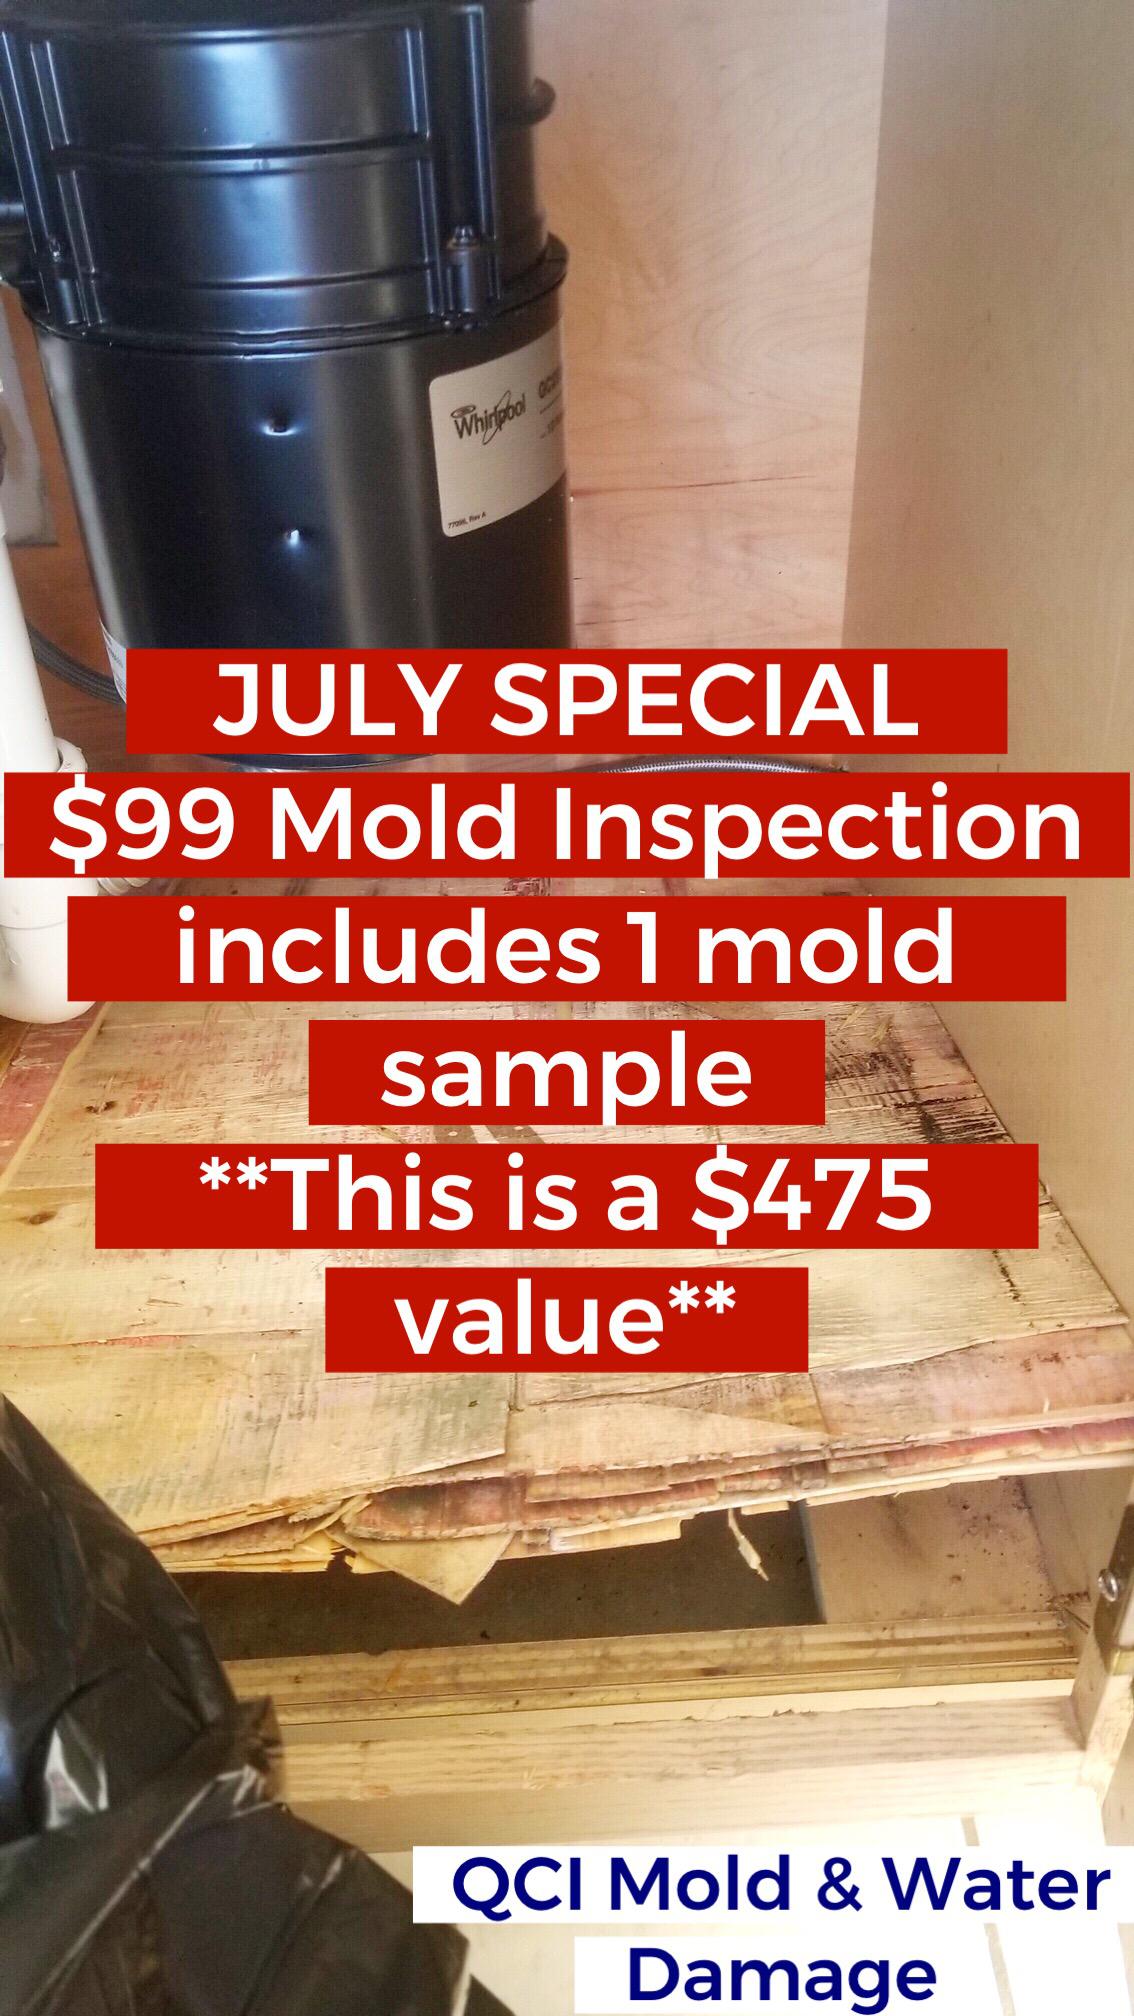 JULY SPECIAL!
Think you may have a mold issue? Need a mold inspection or testing? 

Limited Time Offer, locations included in the special are as follows: Naples, Ft. Myers, North Naples, Bonita Springs, Bonita Beach, Marco Island and Estero.

CALL NOW - 239-777-2875